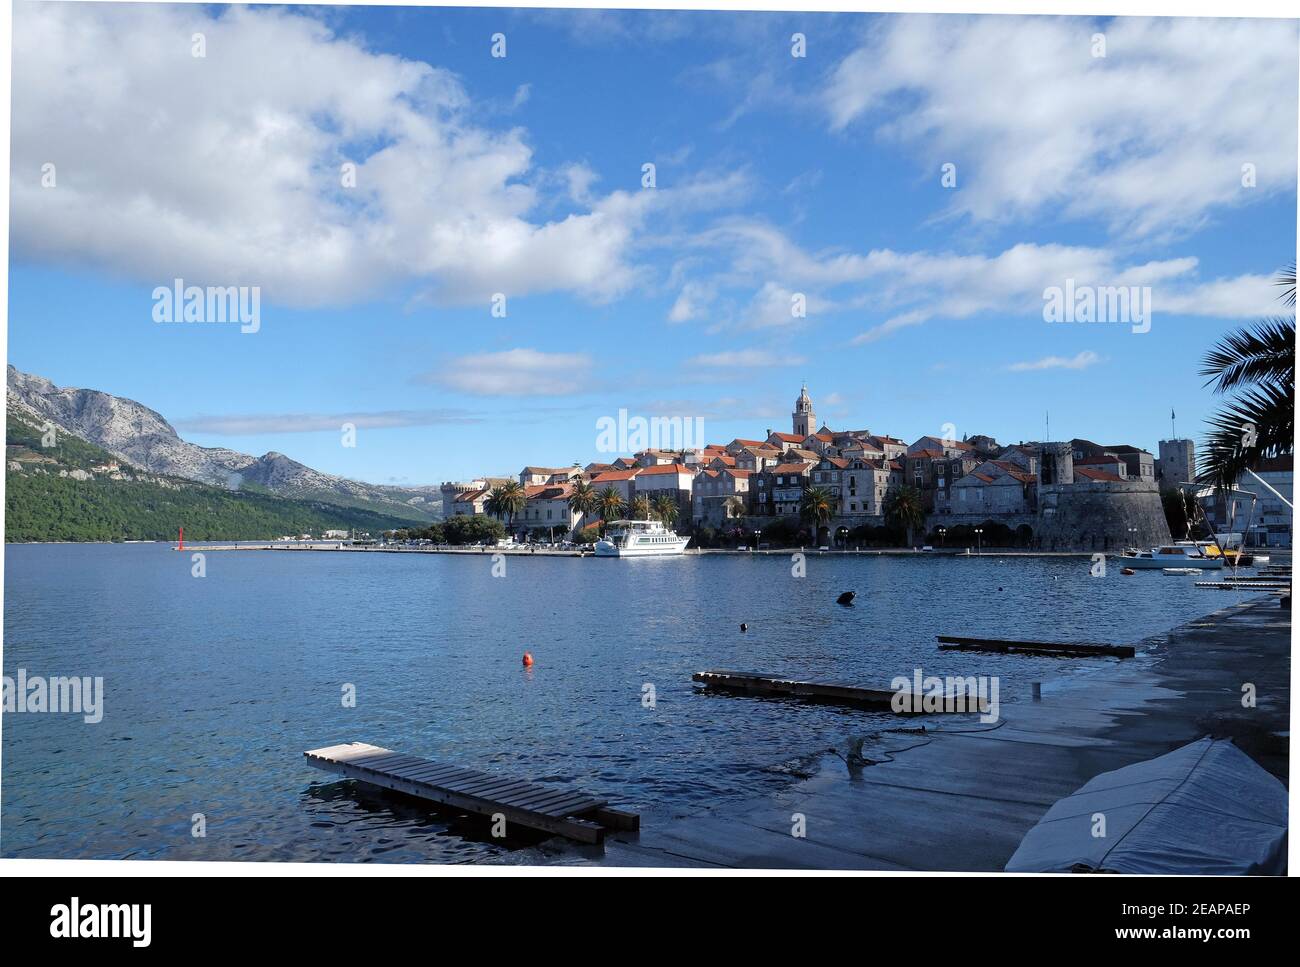 Seafront view at picturesque medieval Dalmatian town Korcula, Croatia Stock Photo